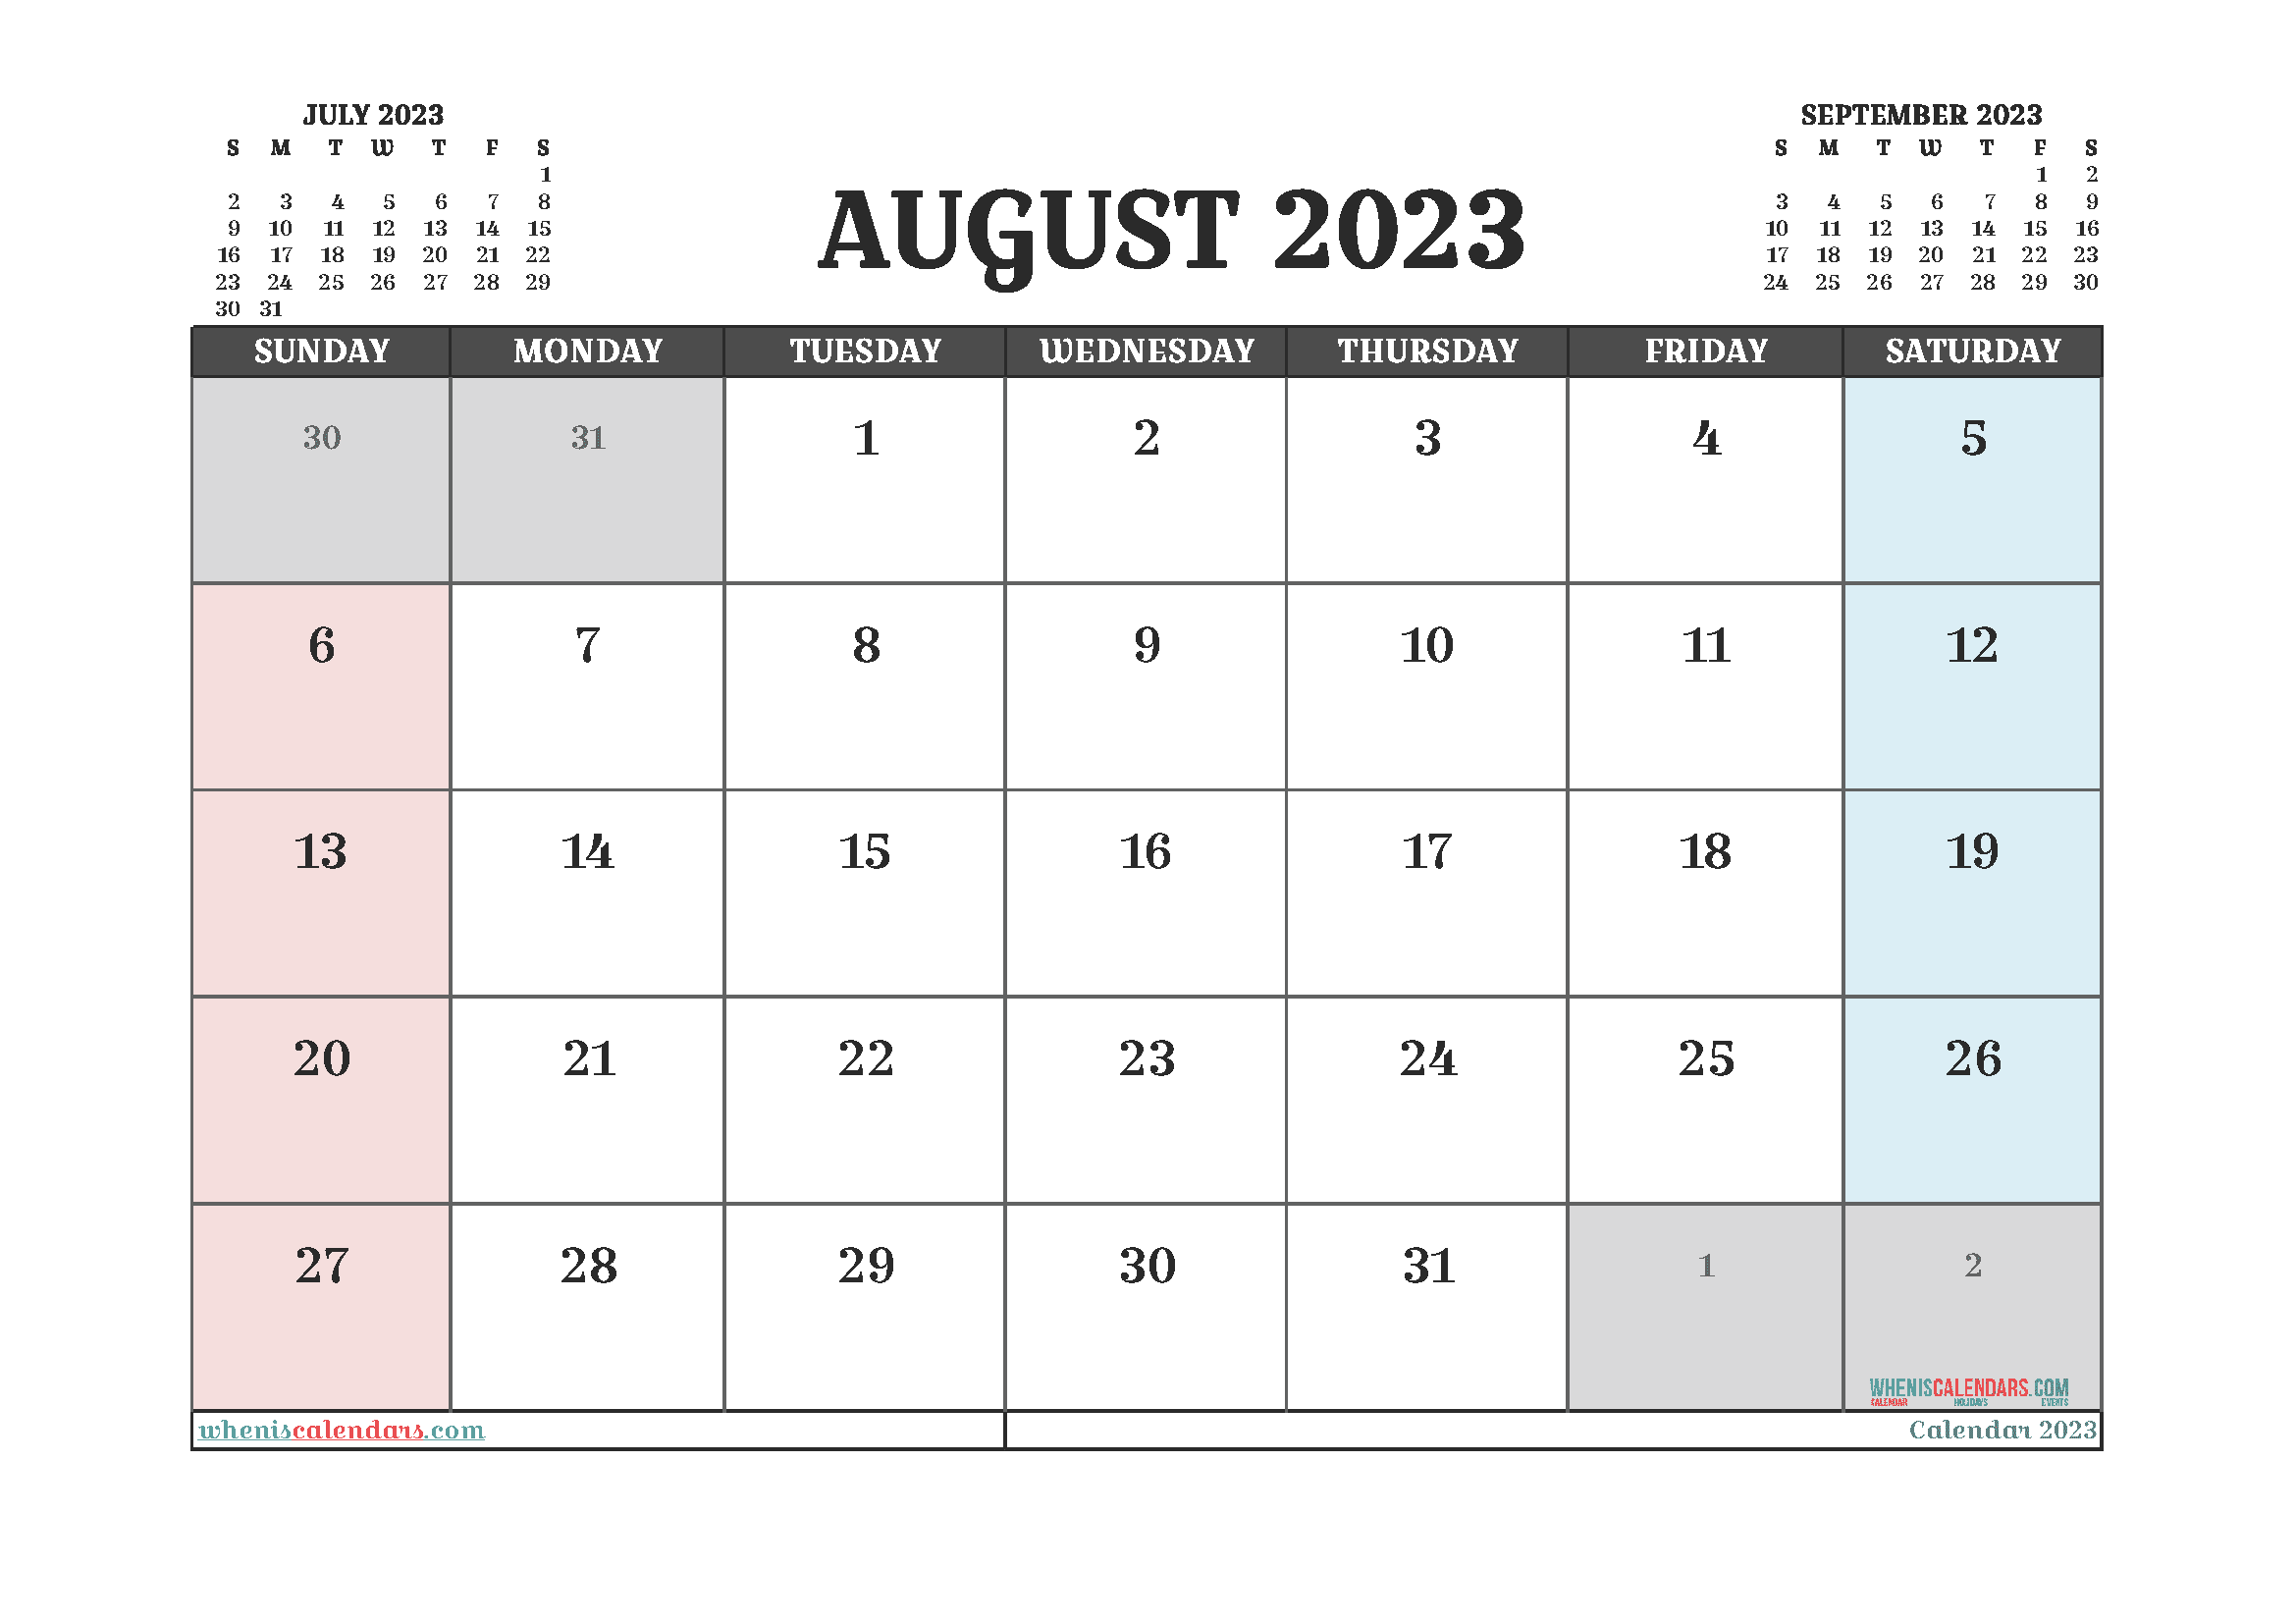 Free Calendar August 2023 with Holidays Printable PDF in Landscape